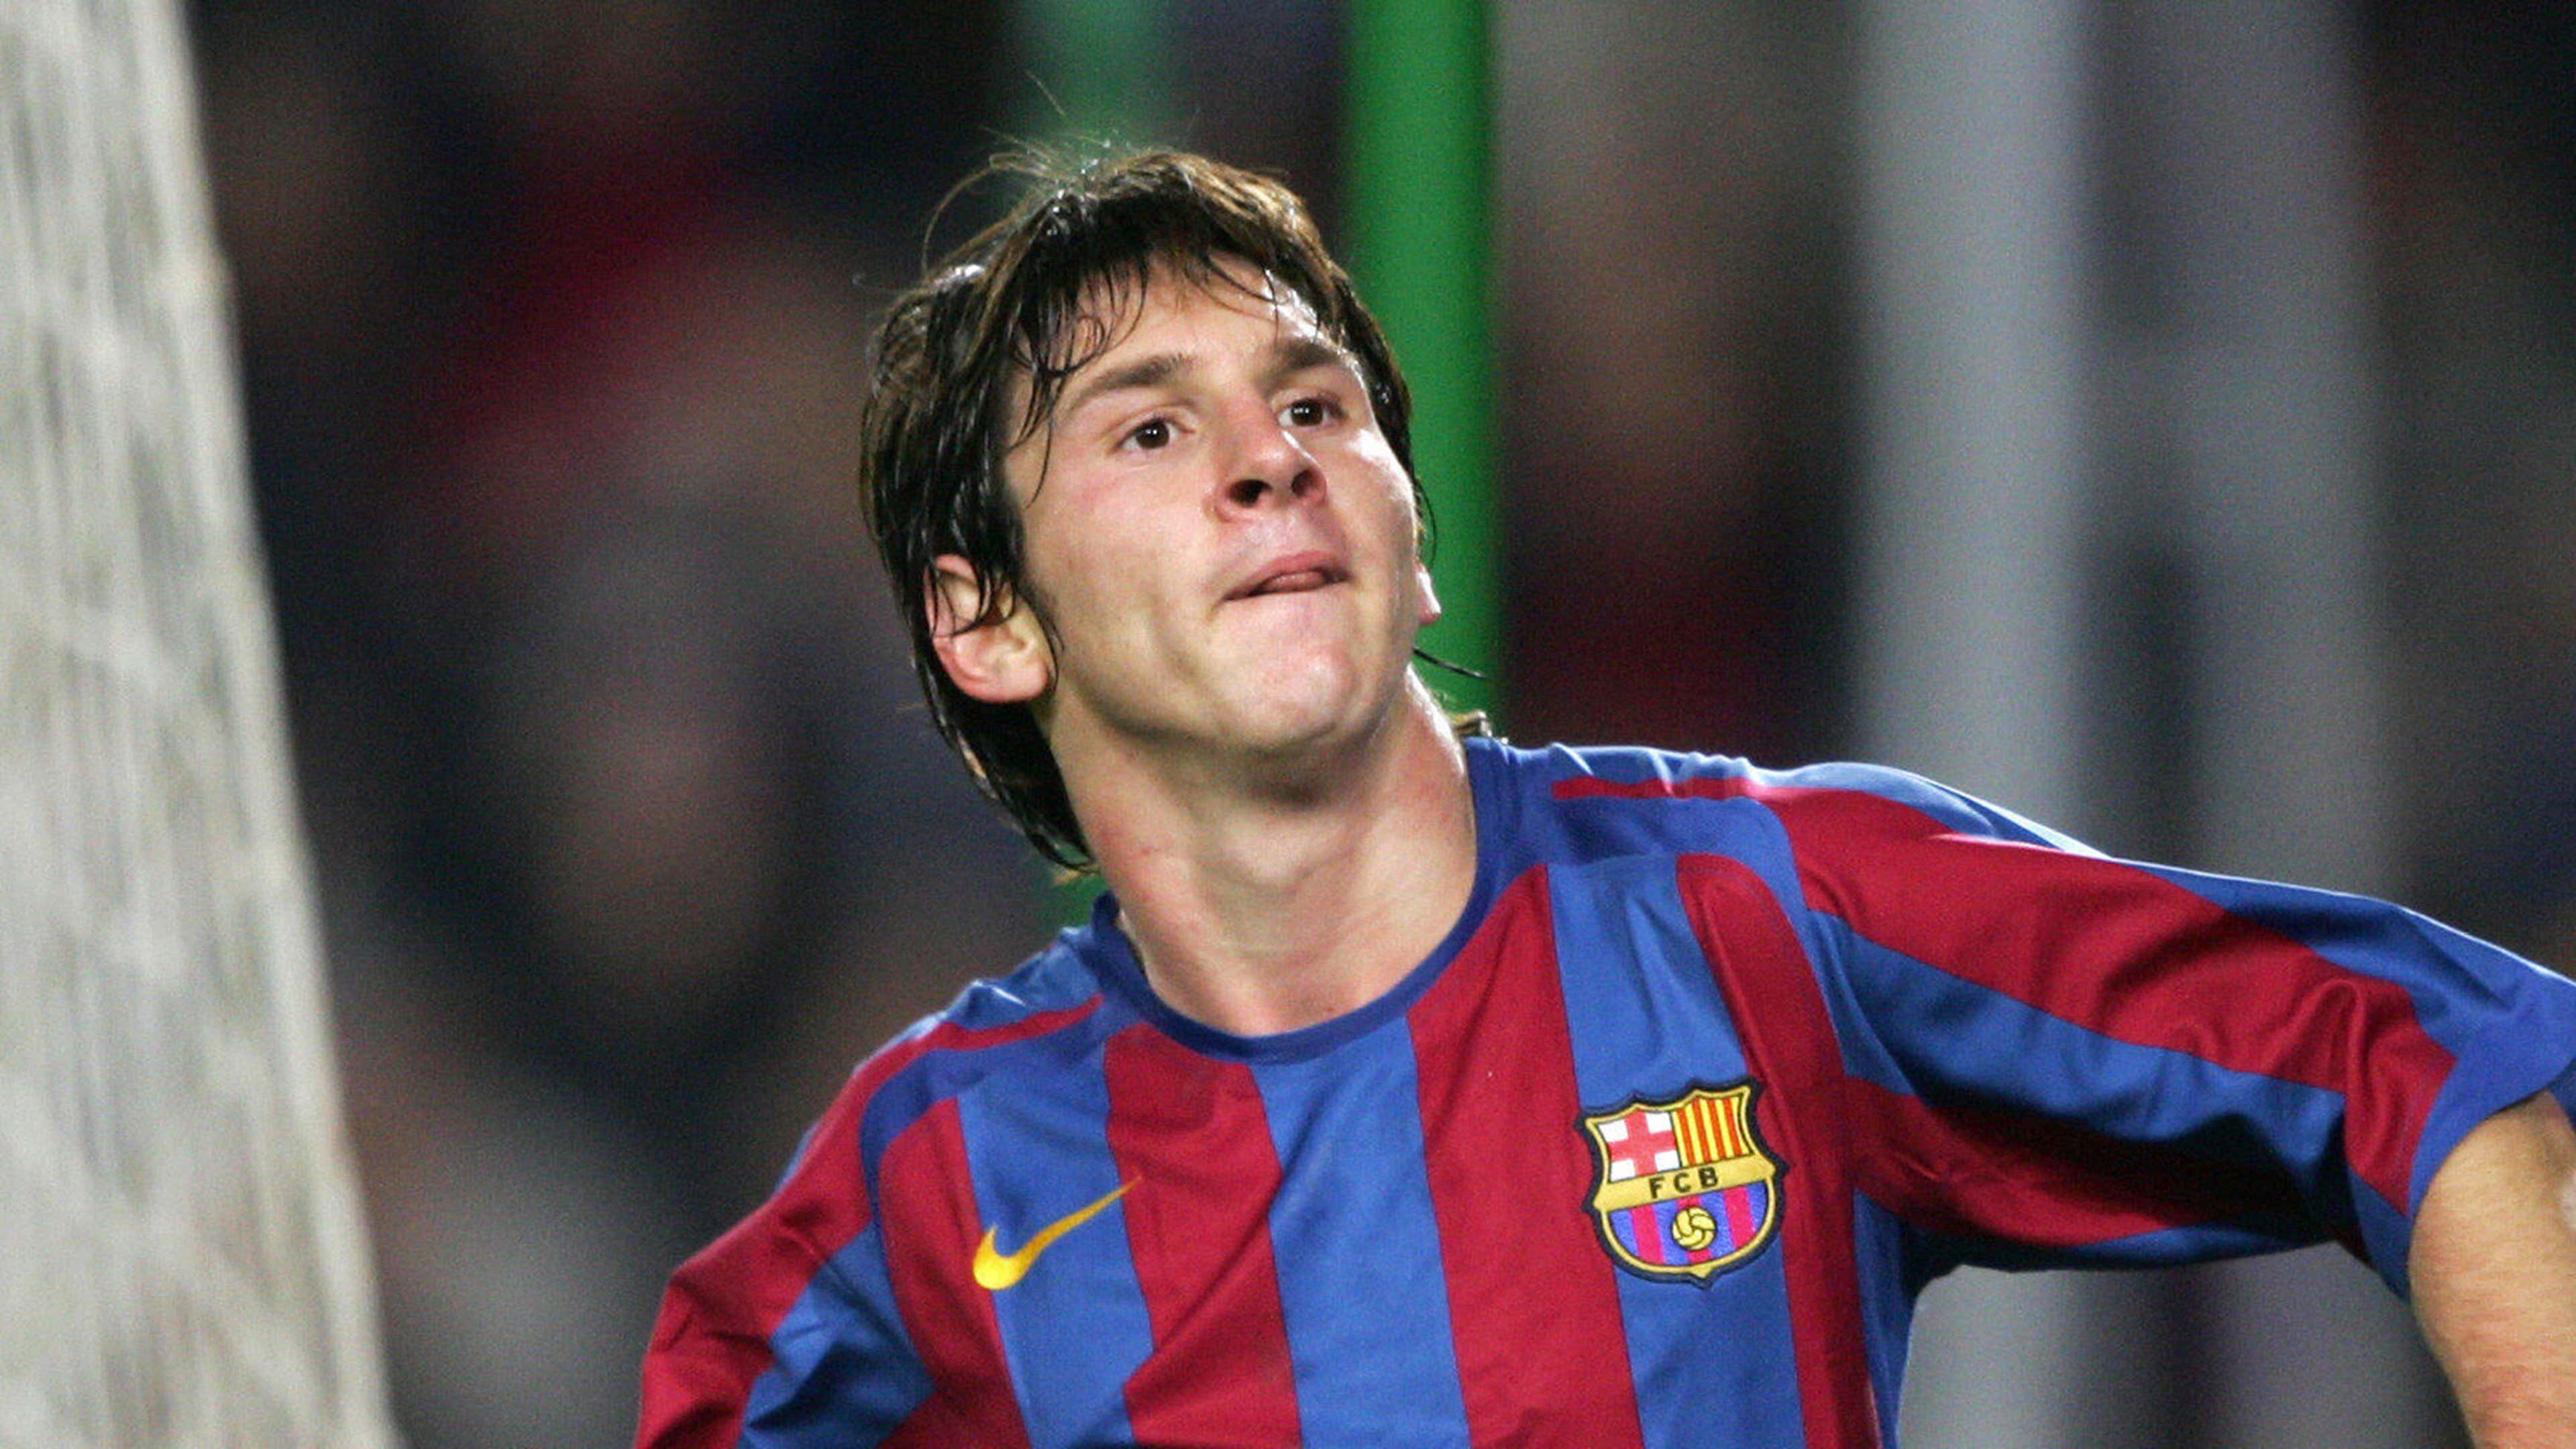 Lionel Messi brings a happy end to one of football's great stories